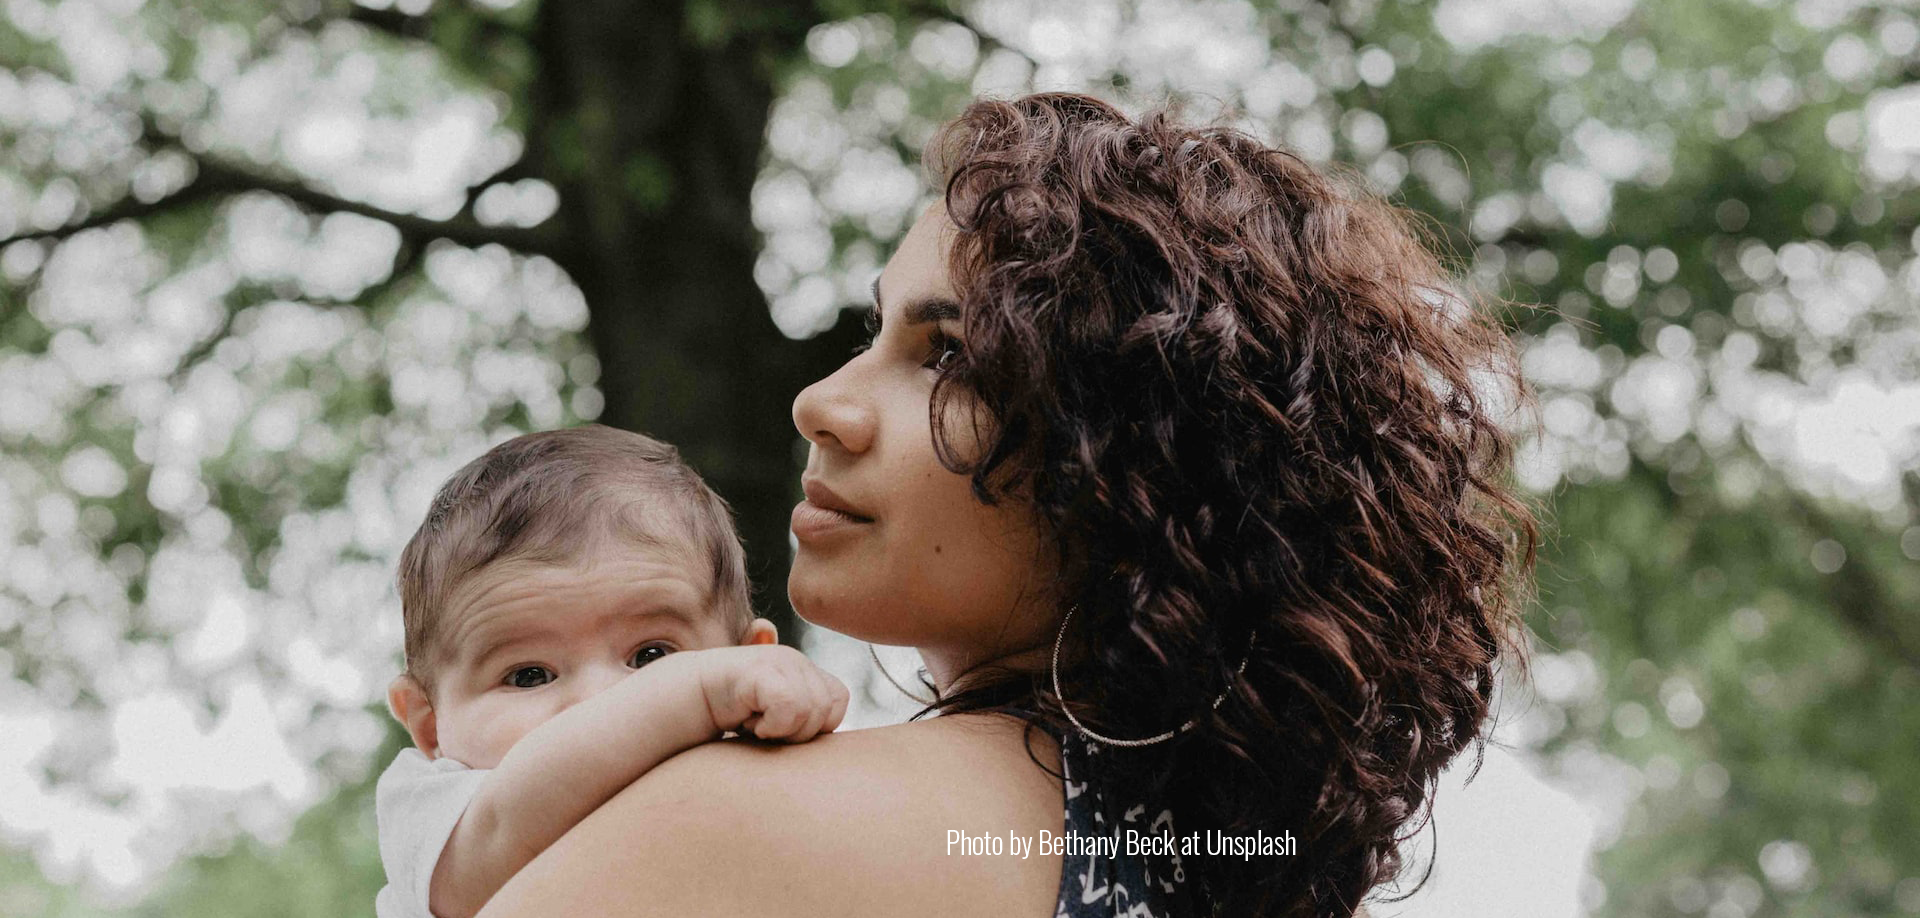 Woman with curly hair holding baby and looking over her shoulder